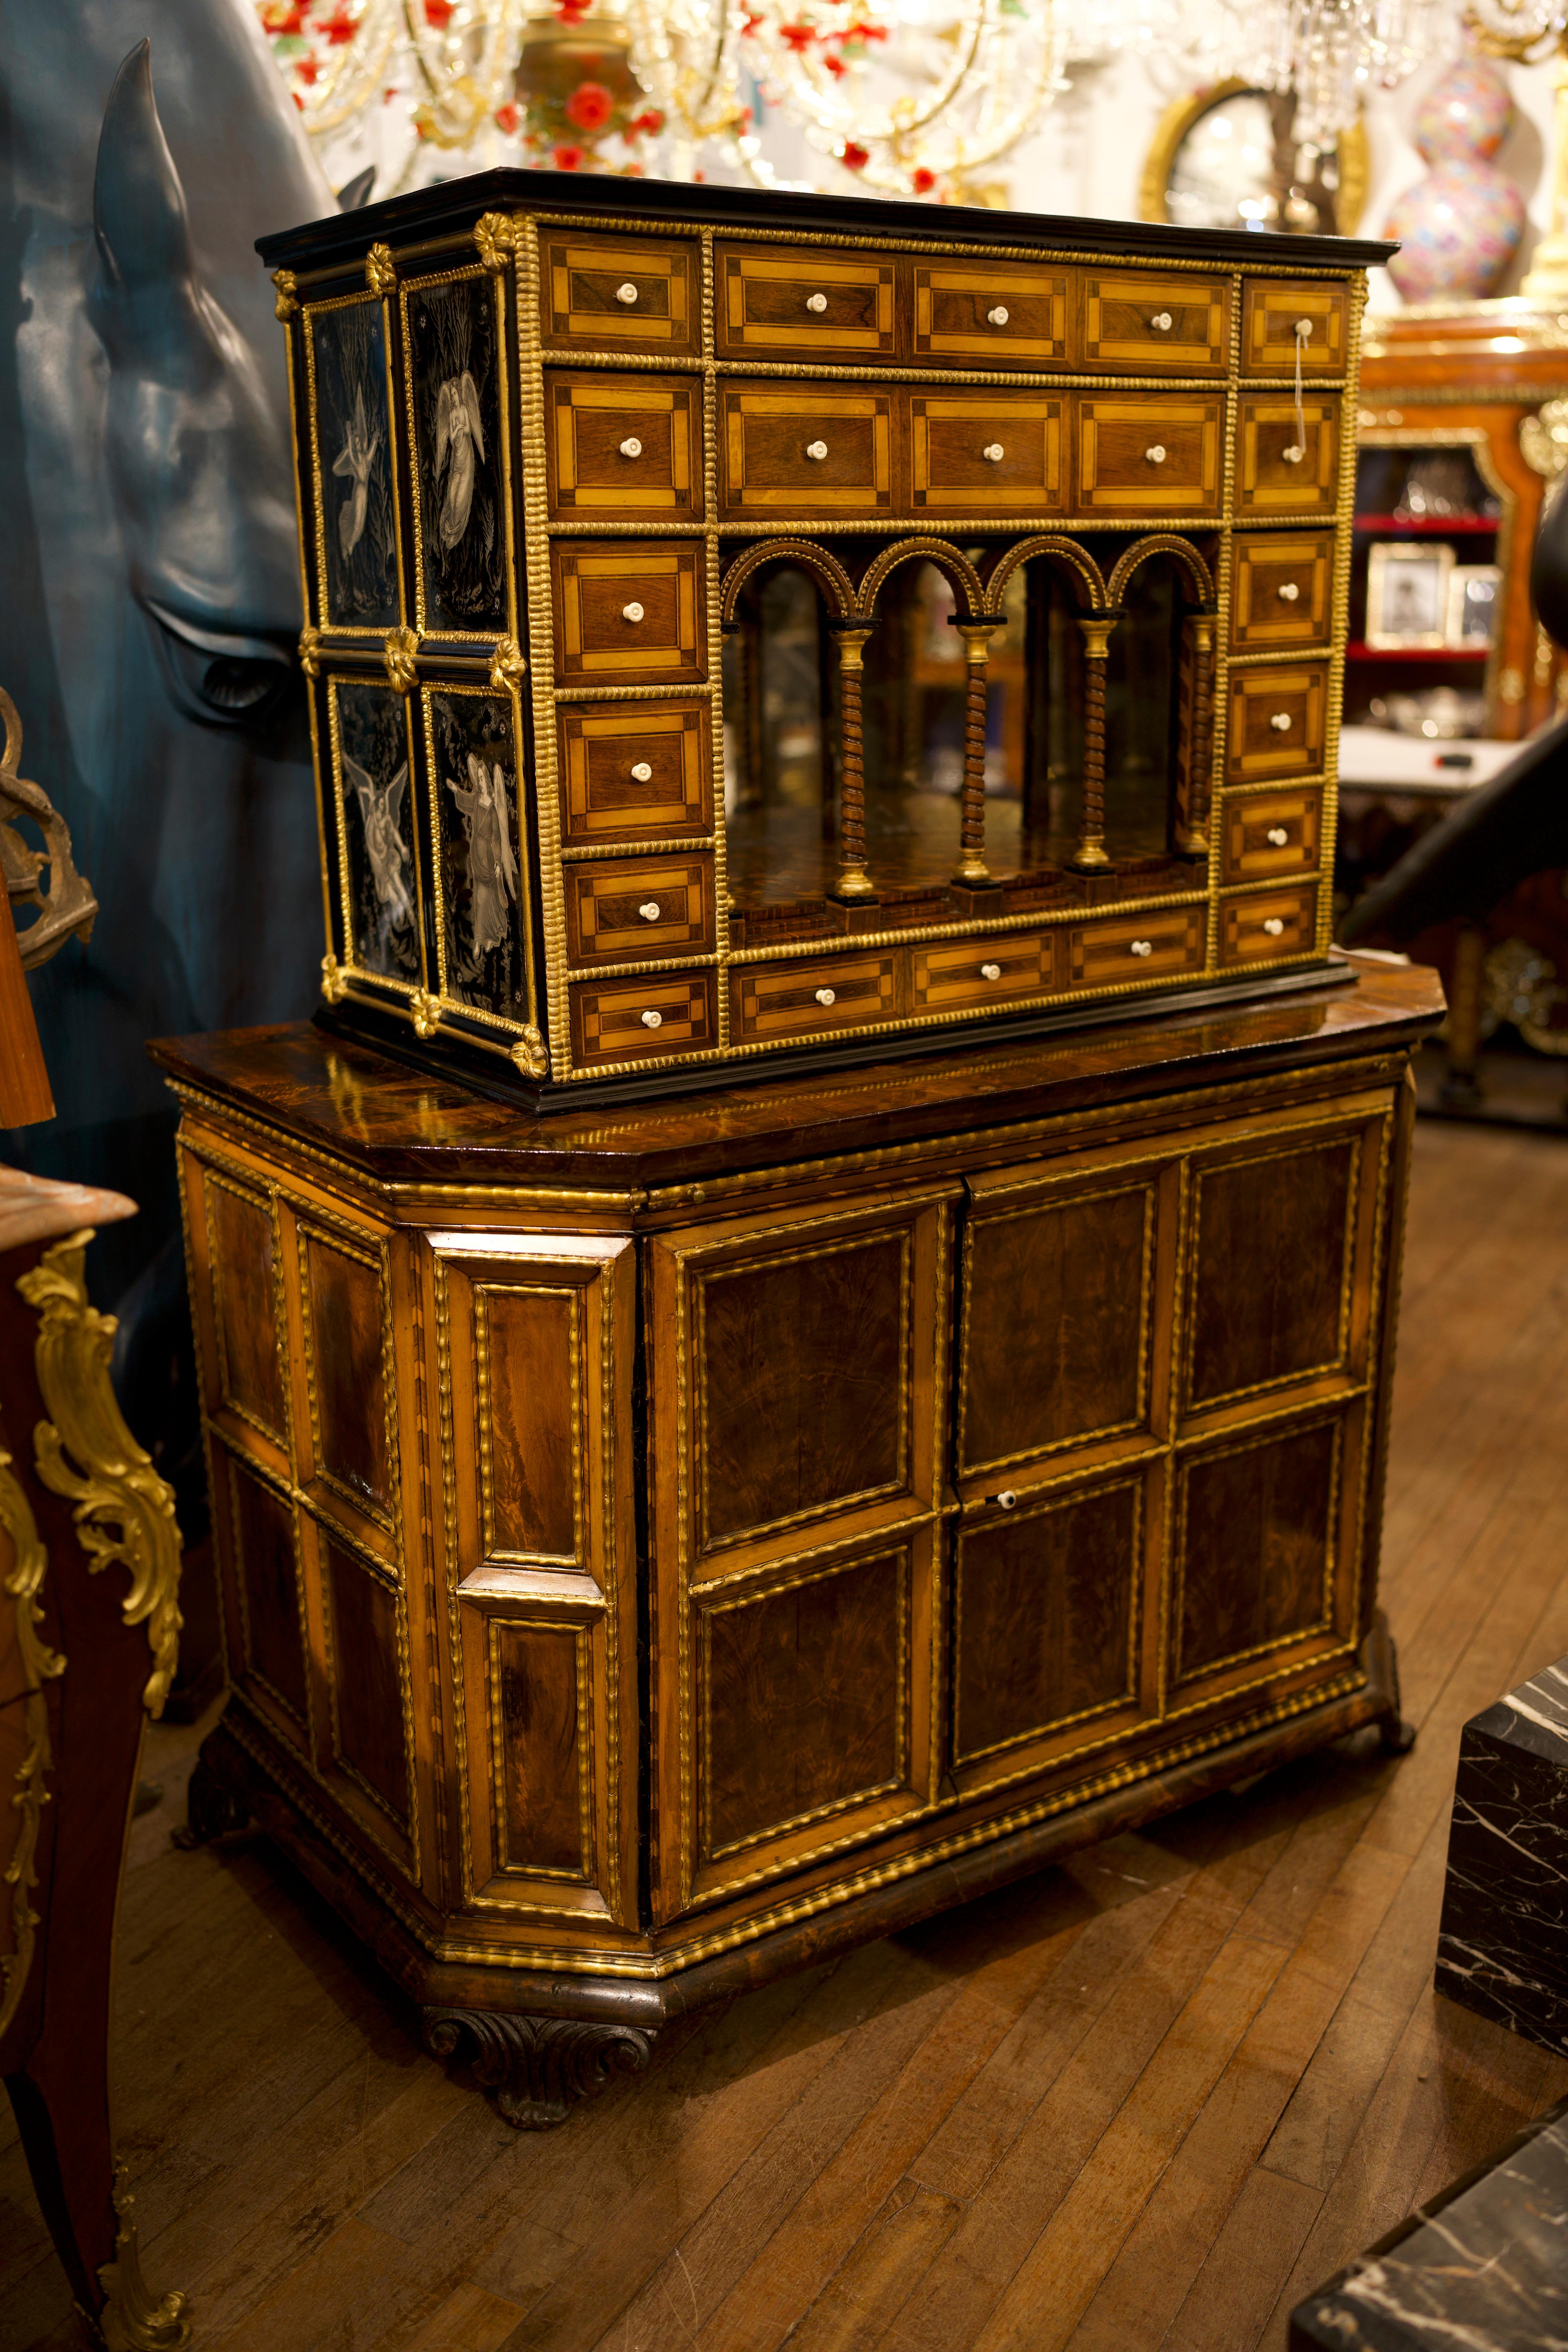 A stunning 18th Century Parquetry Flemish cabinet and base.

The furniture veneered in various woods and brambles of walnut, maple, rosewood and gilded wood decorations. The Upper part with small drawers and castle with twisted columns and mirror.